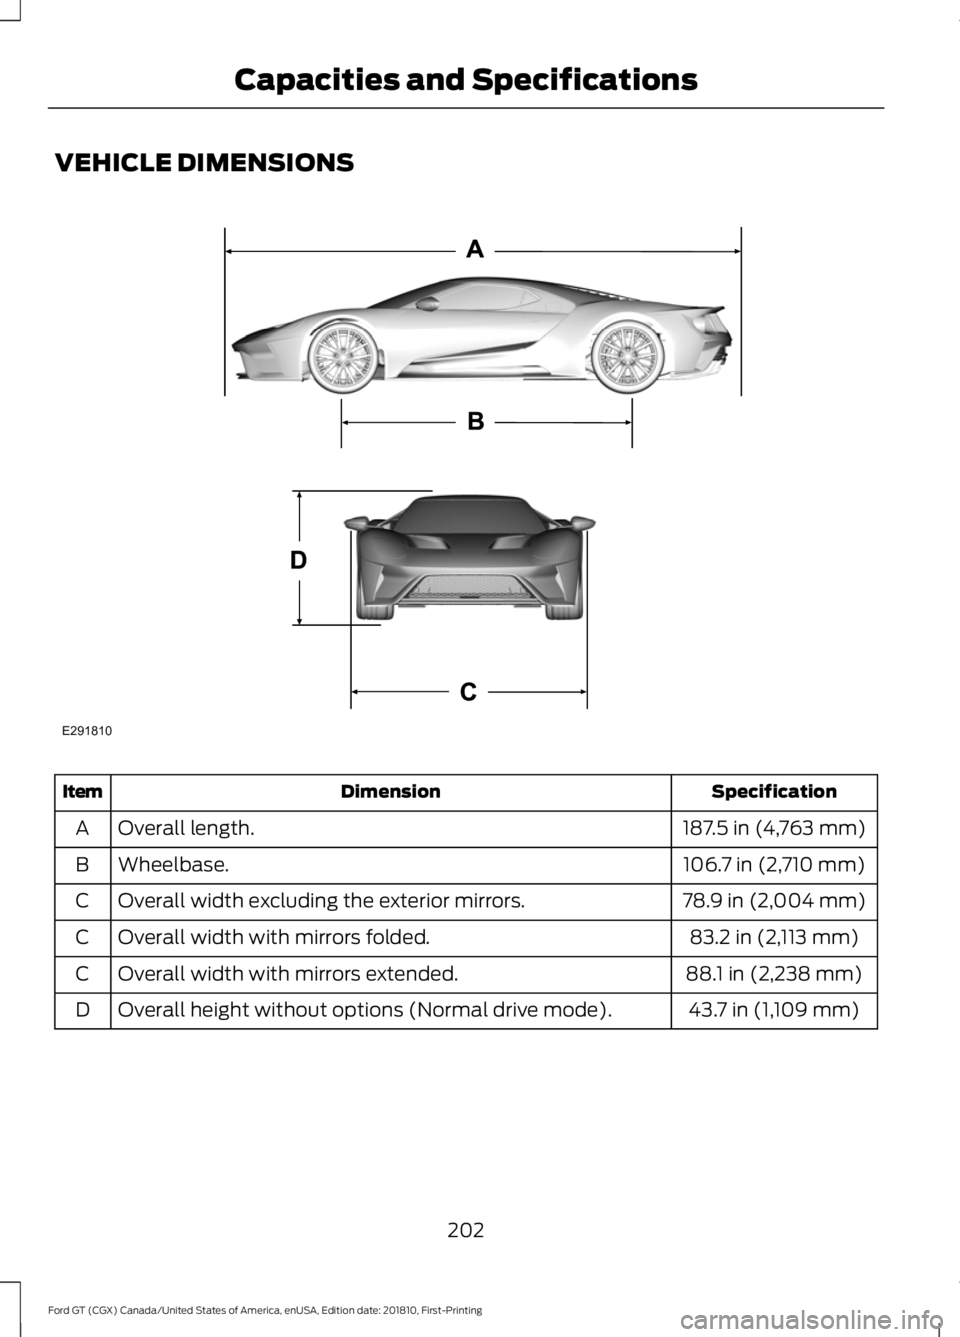 FORD GT 2019  Owners Manual VEHICLE DIMENSIONS
Specification
Dimension
Item
187.5 in (4,763 mm)
Overall length.
A
106.7 in (2,710 mm)
Wheelbase.
B
78.9 in (2,004 mm)
Overall width excluding the exterior mirrors.
C
83.2 in (2,113